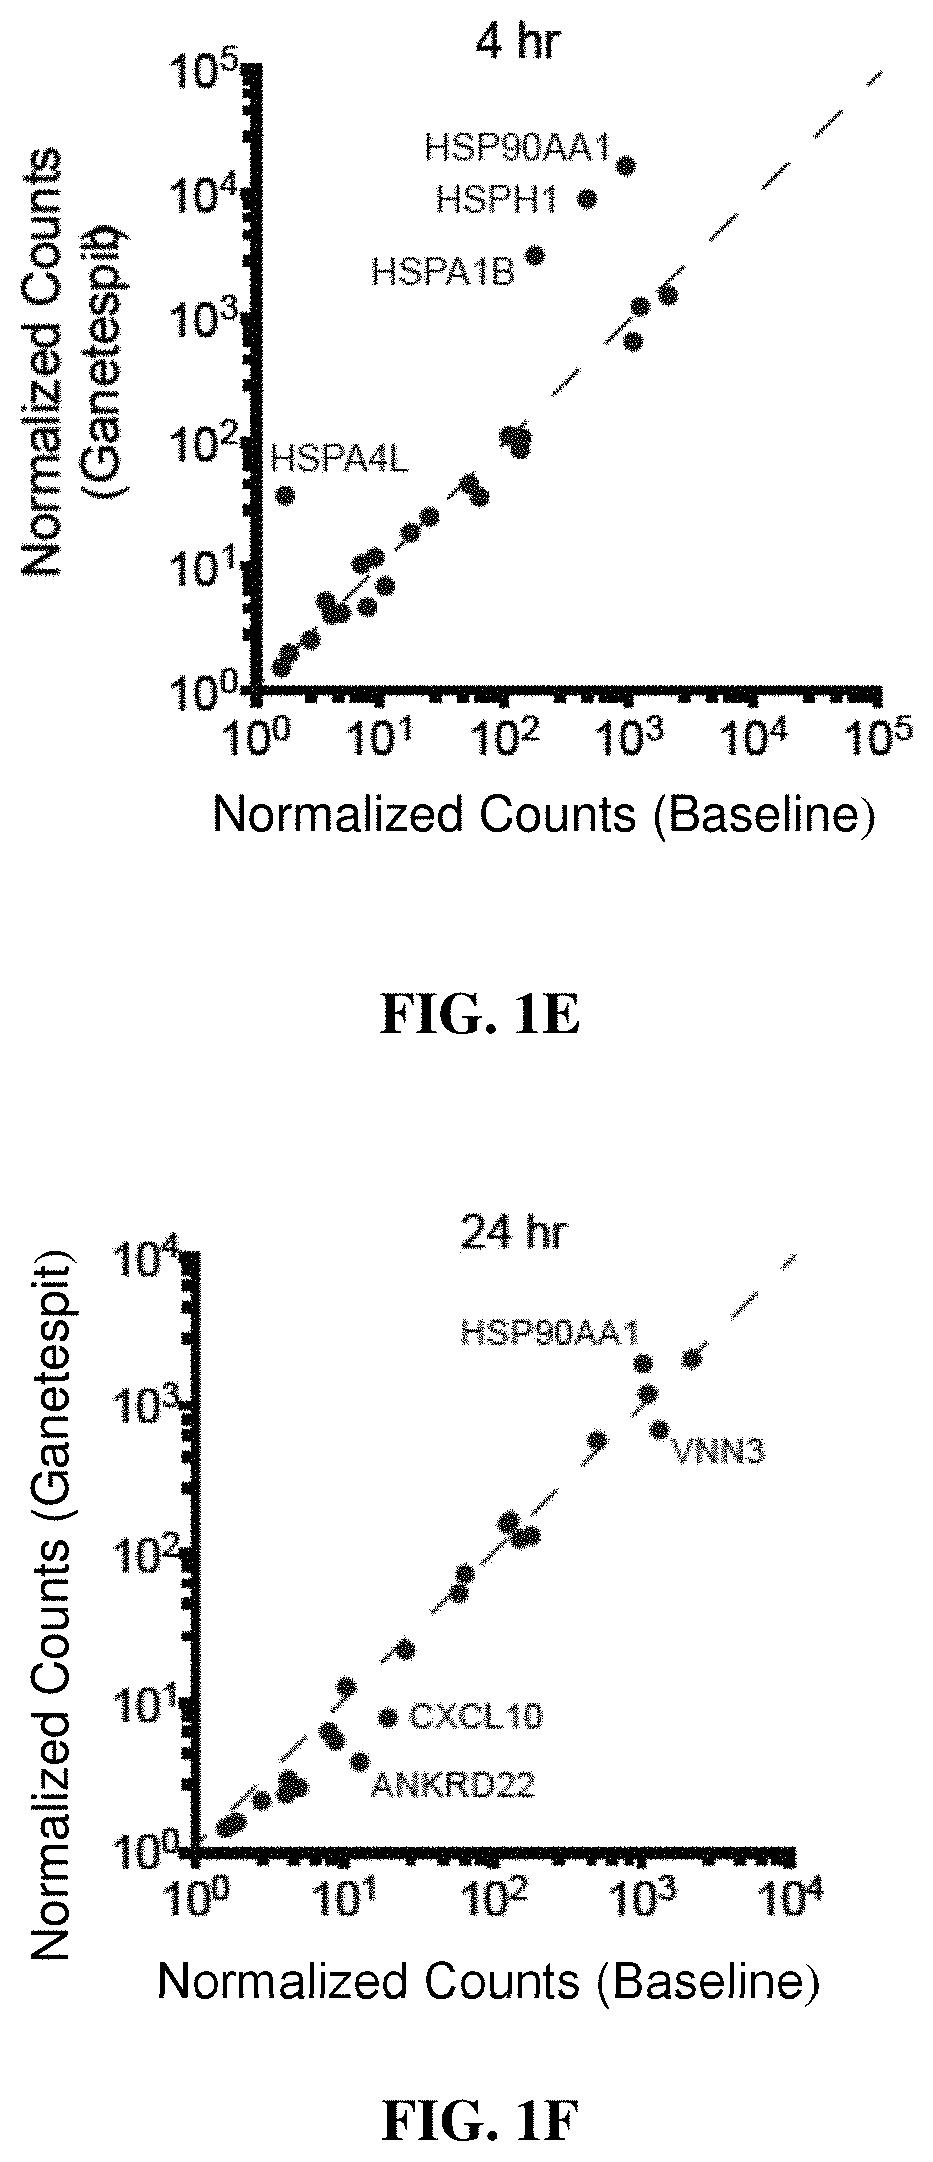 Combination treatments of hsp90 inhibitors for enhancing tumor immunogenicity and methods of use thereof